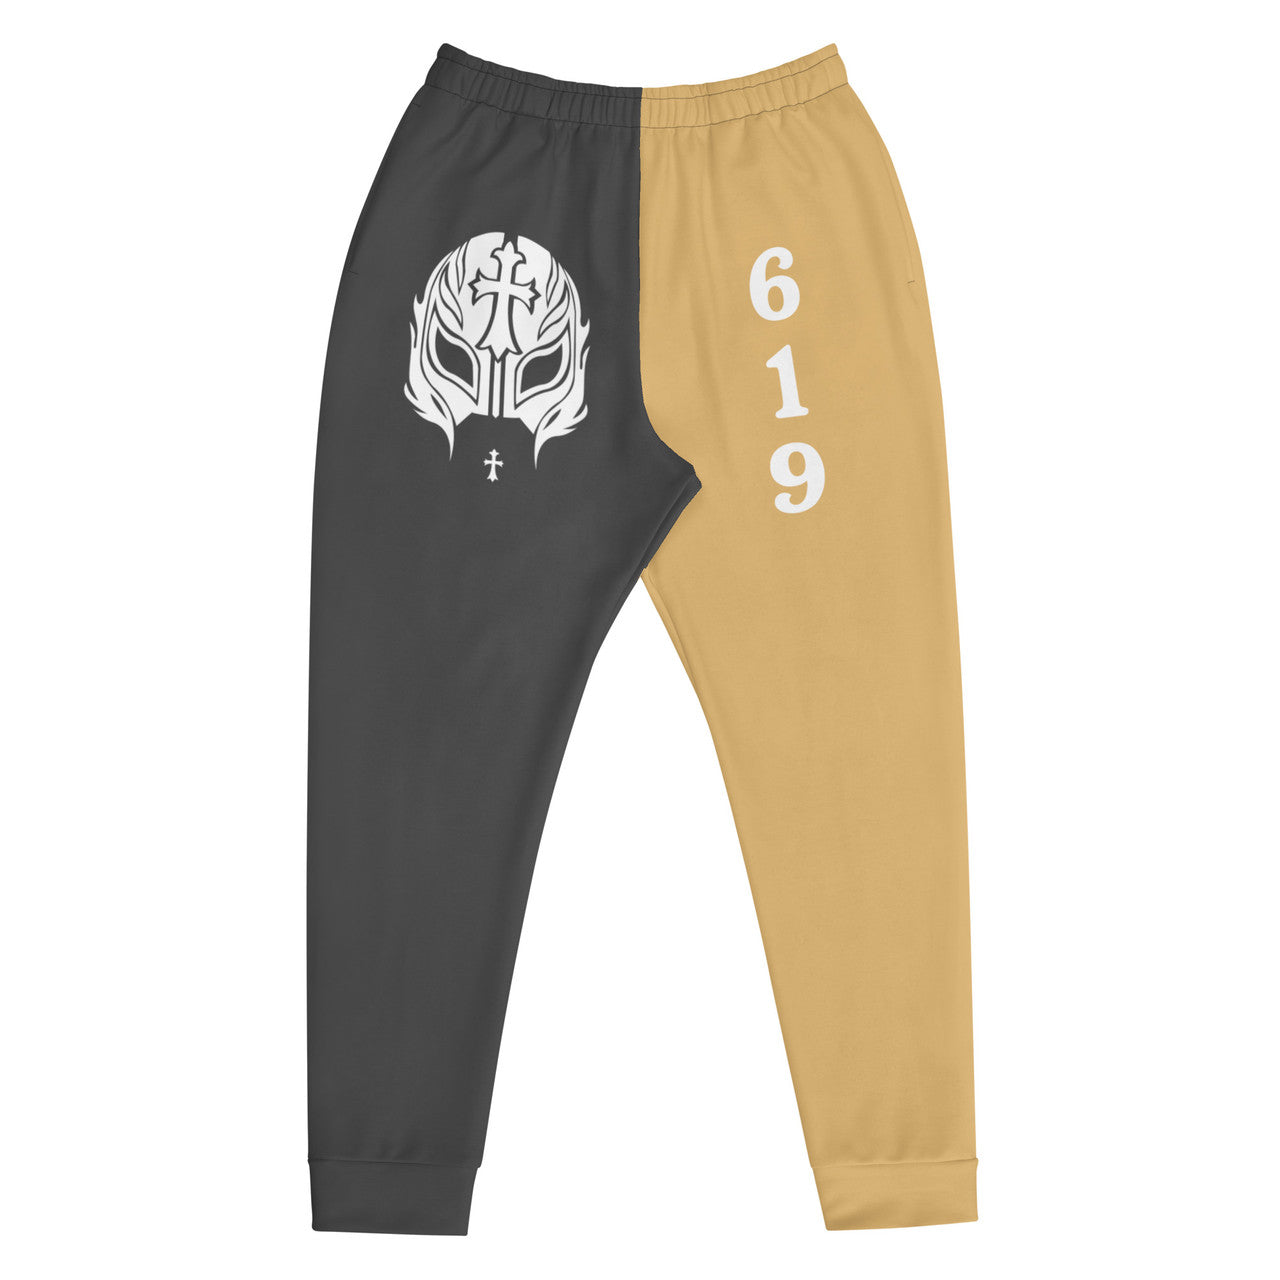 Rey Mysterio Inspired KiSS Men's Joggers - Sports Wrestling 619 Mexico